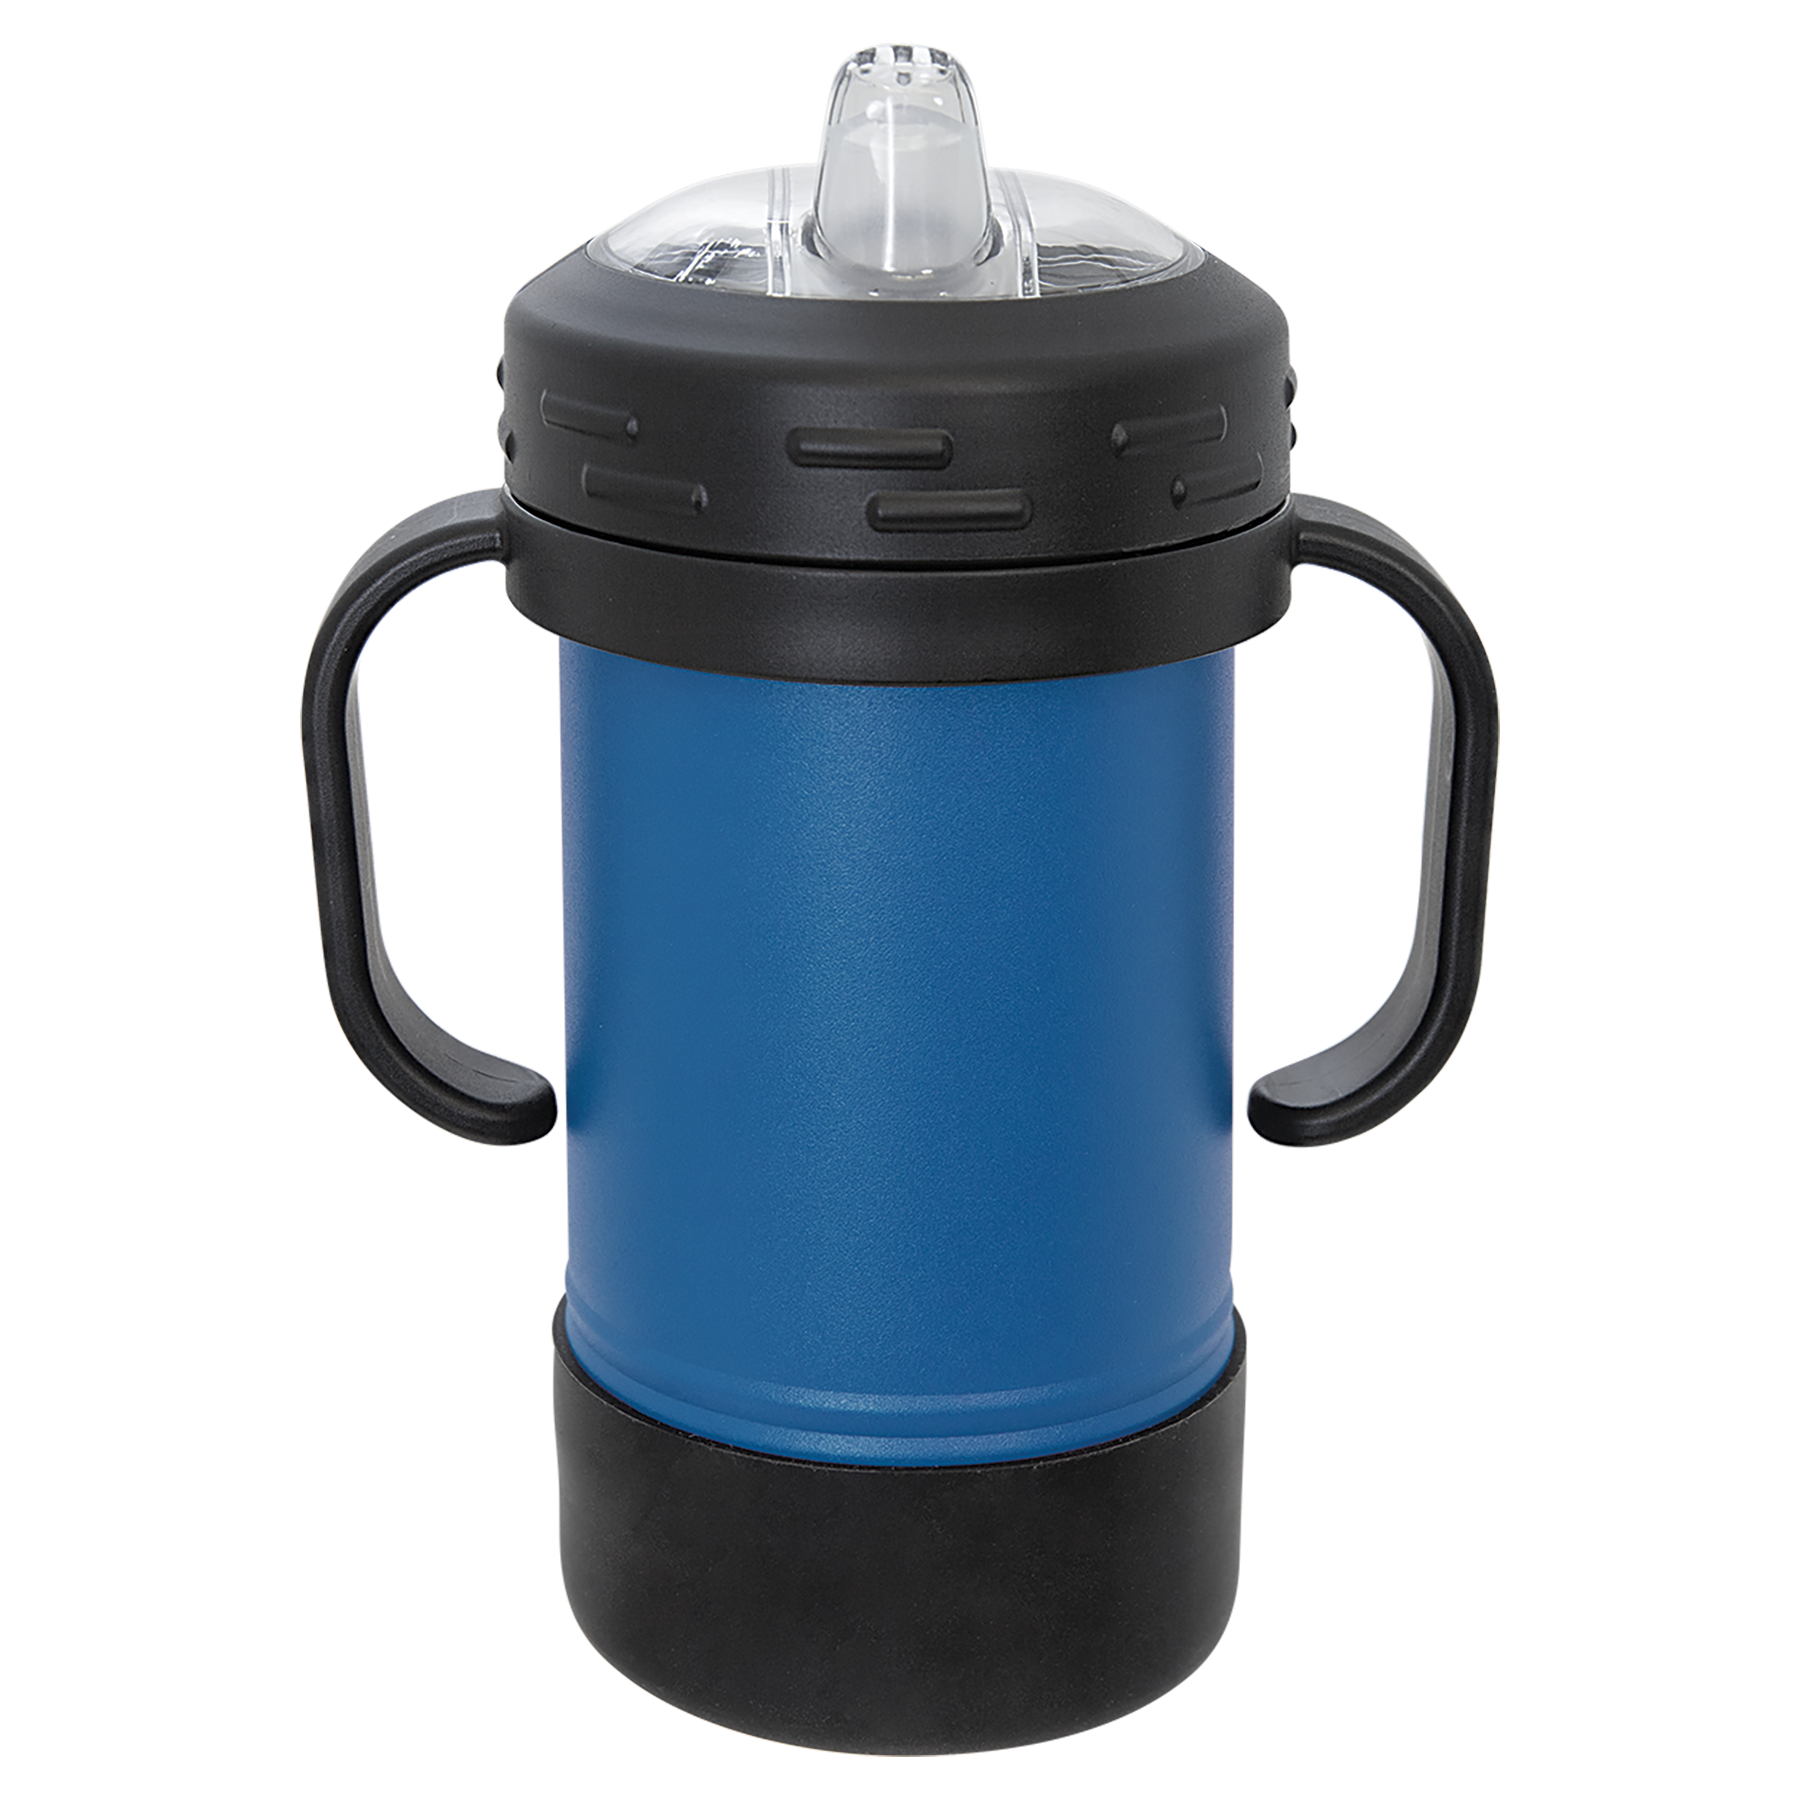 Royal Blue 10oz Sippy Cup -One Free Engraving -Double-wall Vacuum Insulated -Made from 18/8 Gauge Stainless Steel (Type 304 Food Grade) -Lid is BPA Free (Hand Wash Only) -Removable Handles & Silicone Boot -Screw on Lid with Rubber Leak Resistant valve -Not recommended for Dishwasher -8 Color Options -Perfect for Personalized Gifts, Awards, Incentives, Swag & Fundraisers